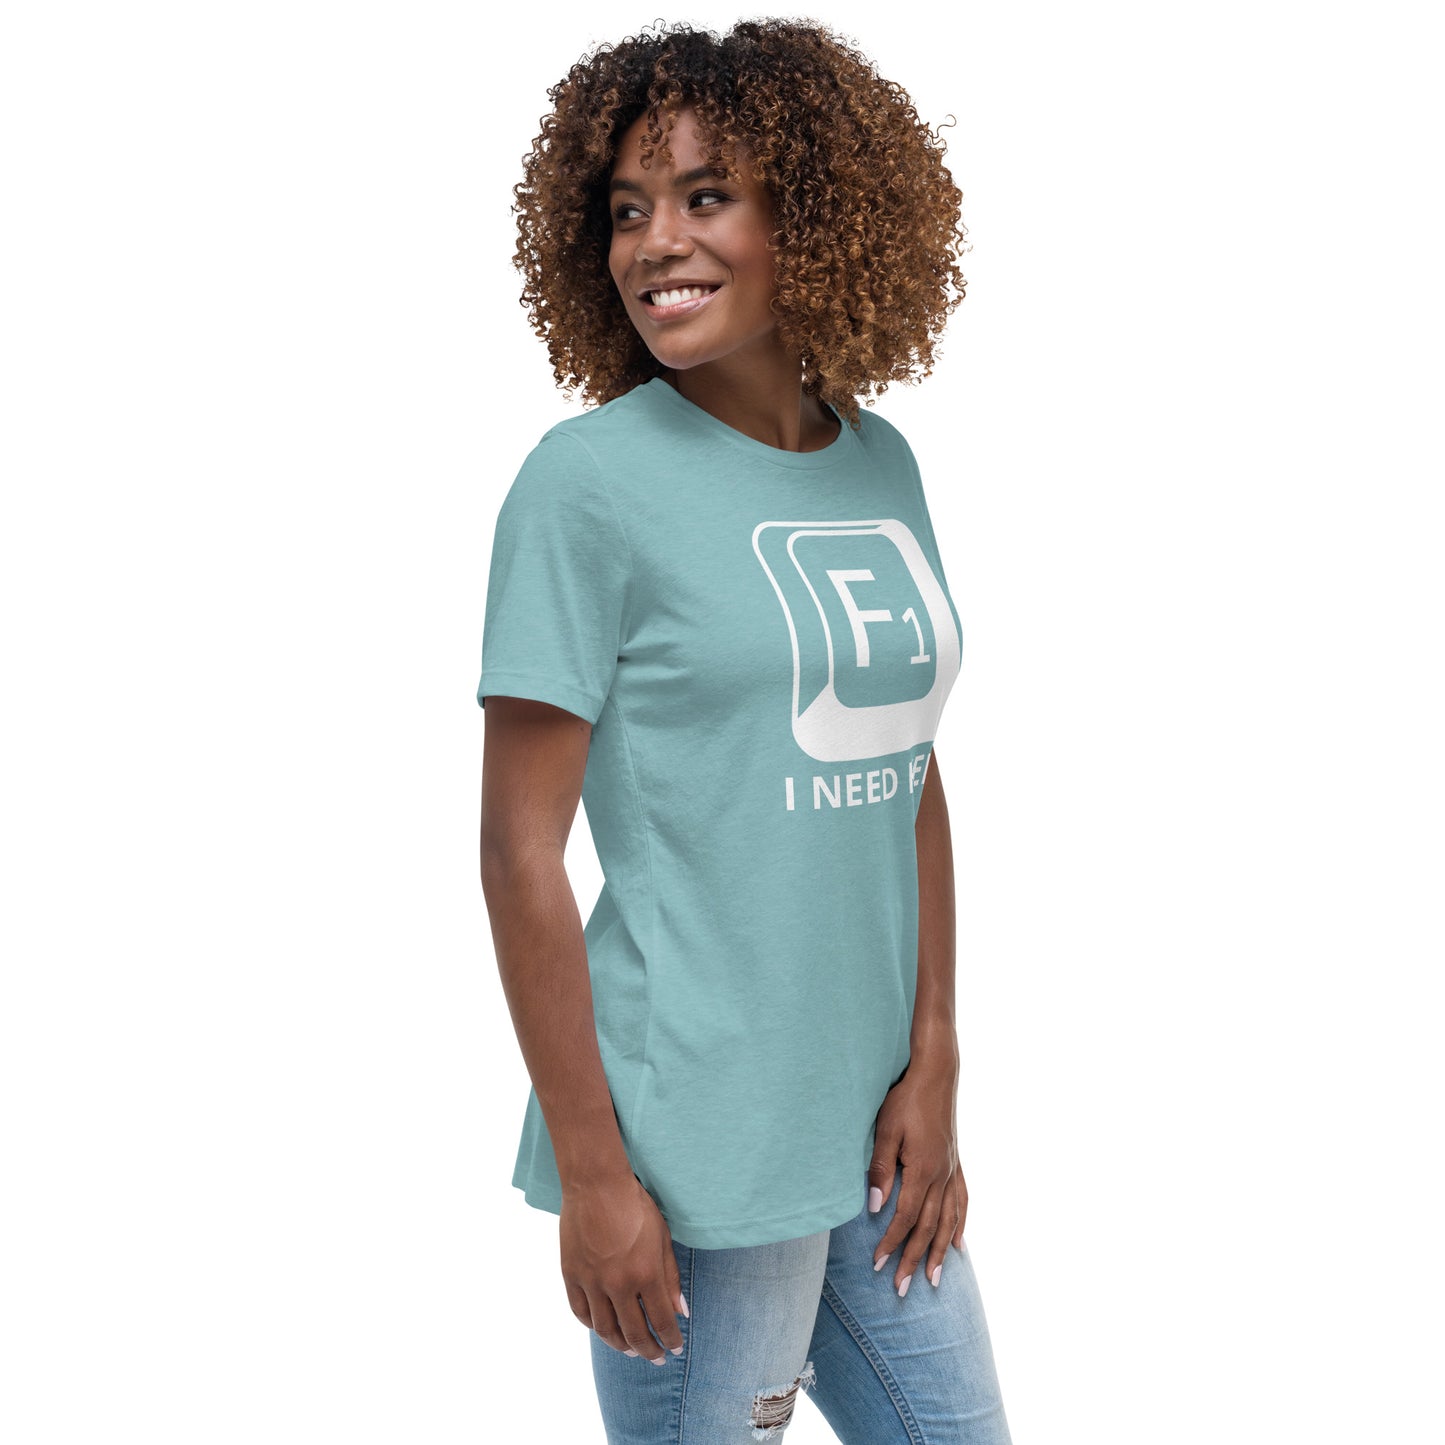 Woman with blue lagoon t-shirt with picture of "F1" key and text "I need help"